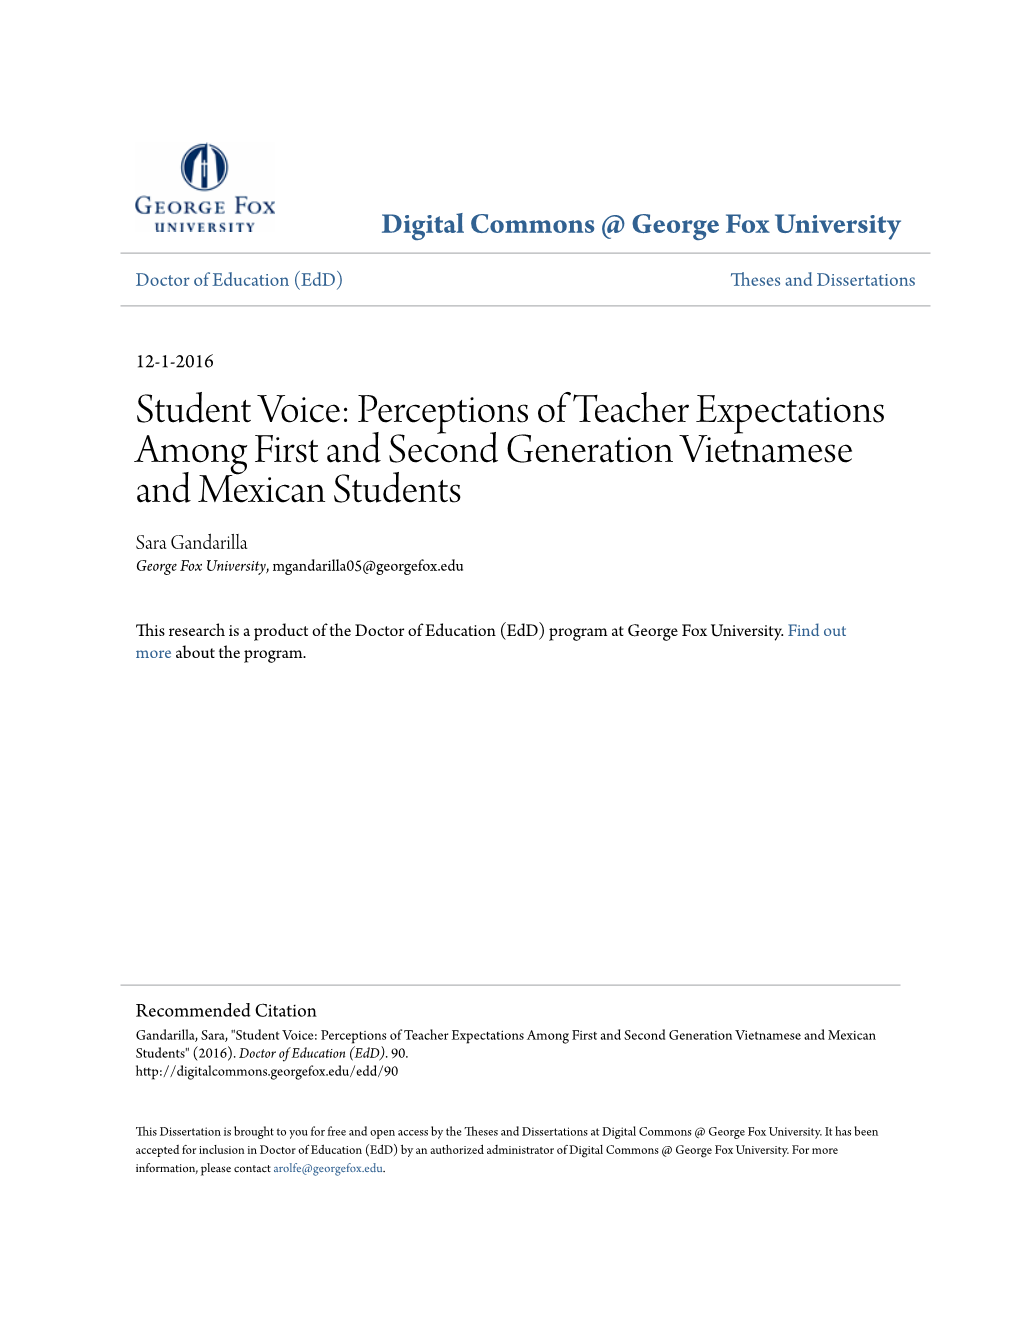 Perceptions of Teacher Expectations Among First and Second